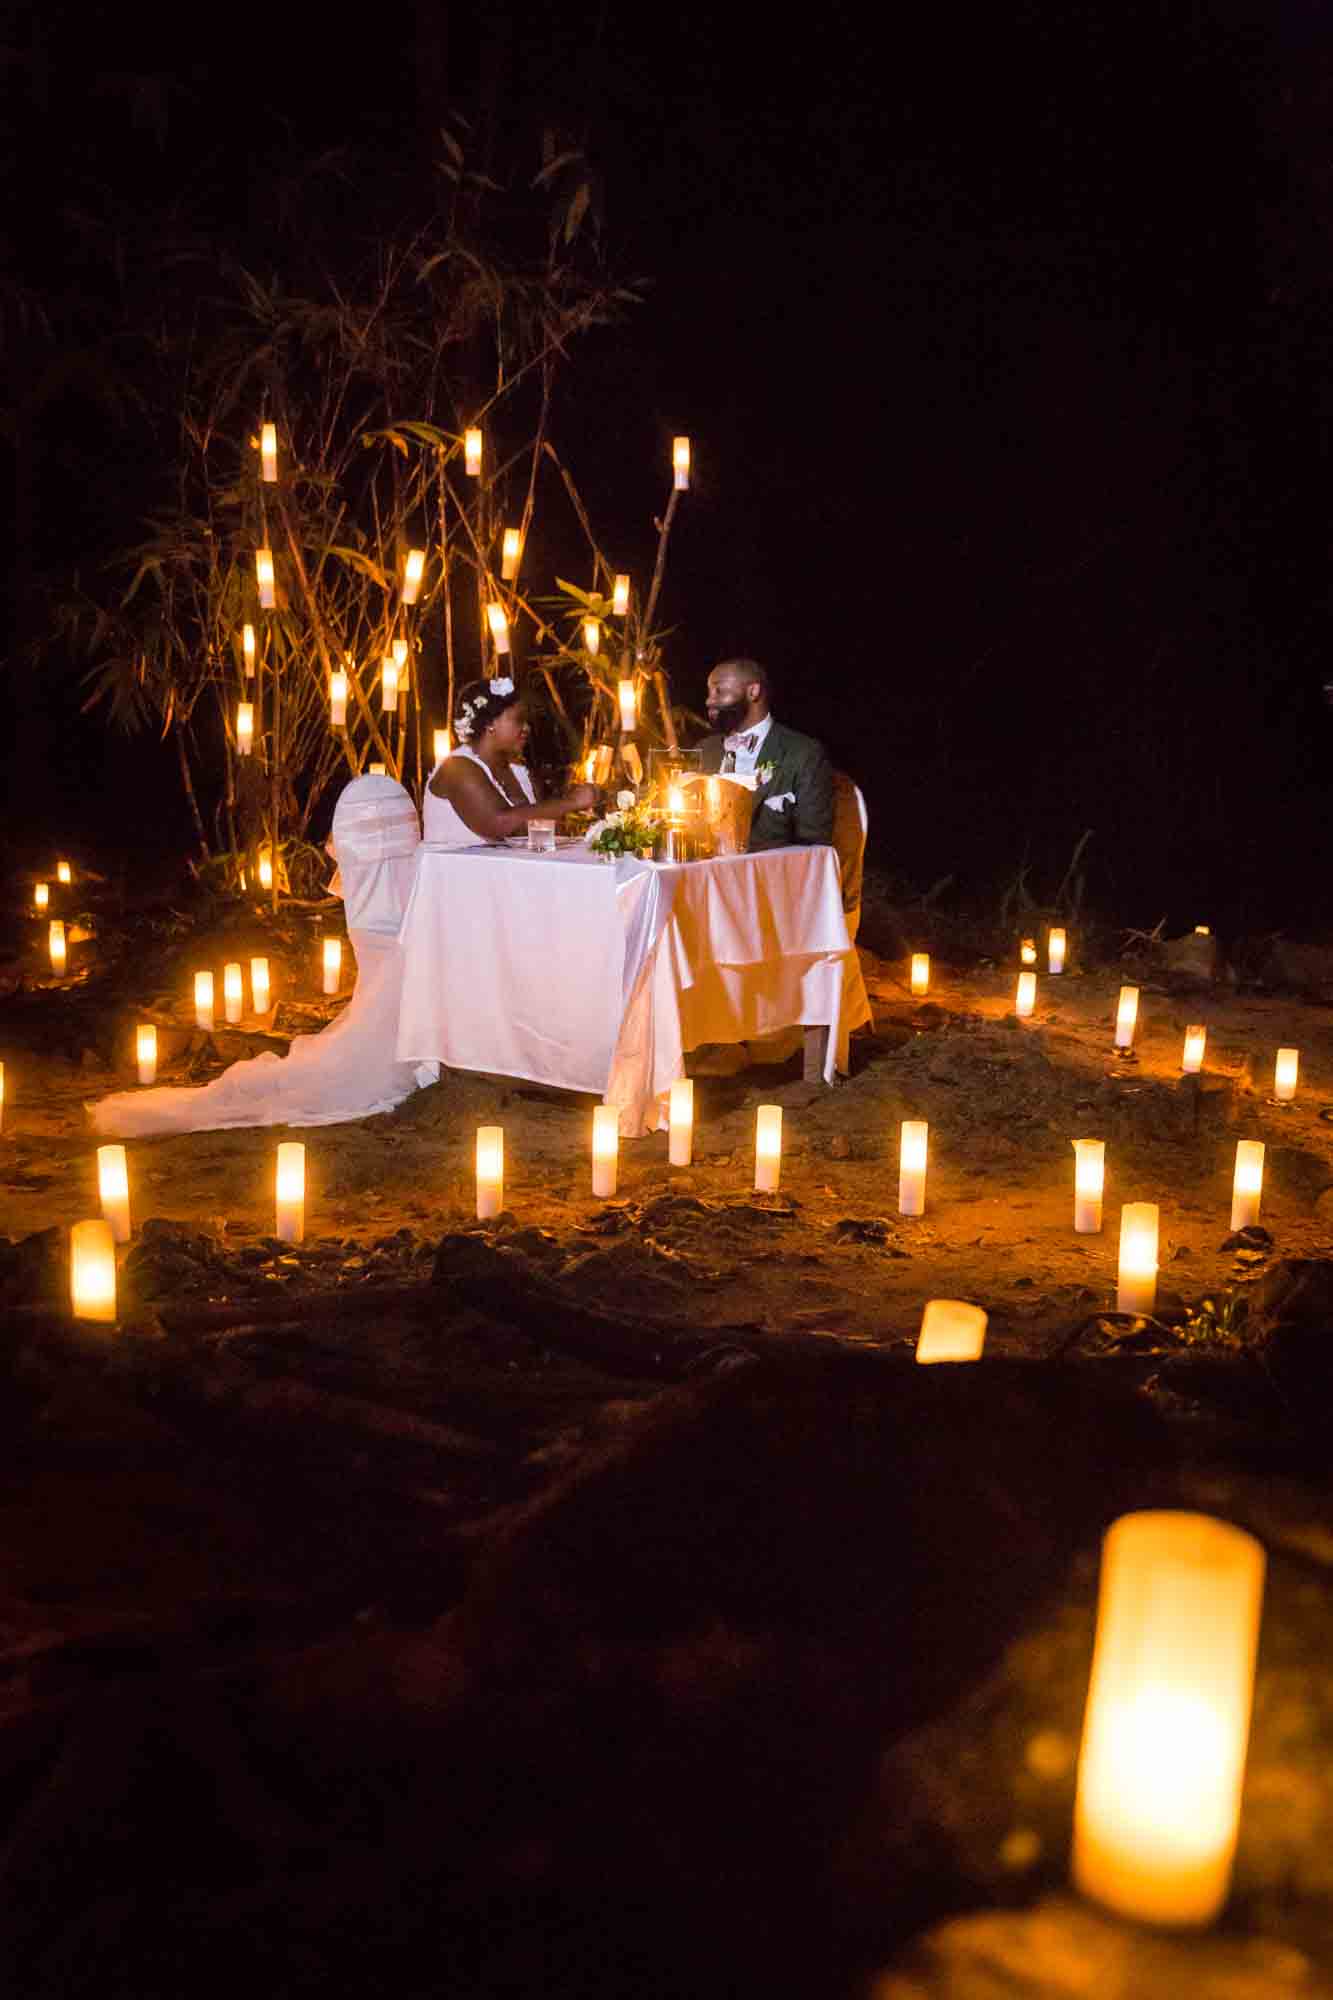 Bride and groom dining by candlelight for an article on destination wedding planning tips